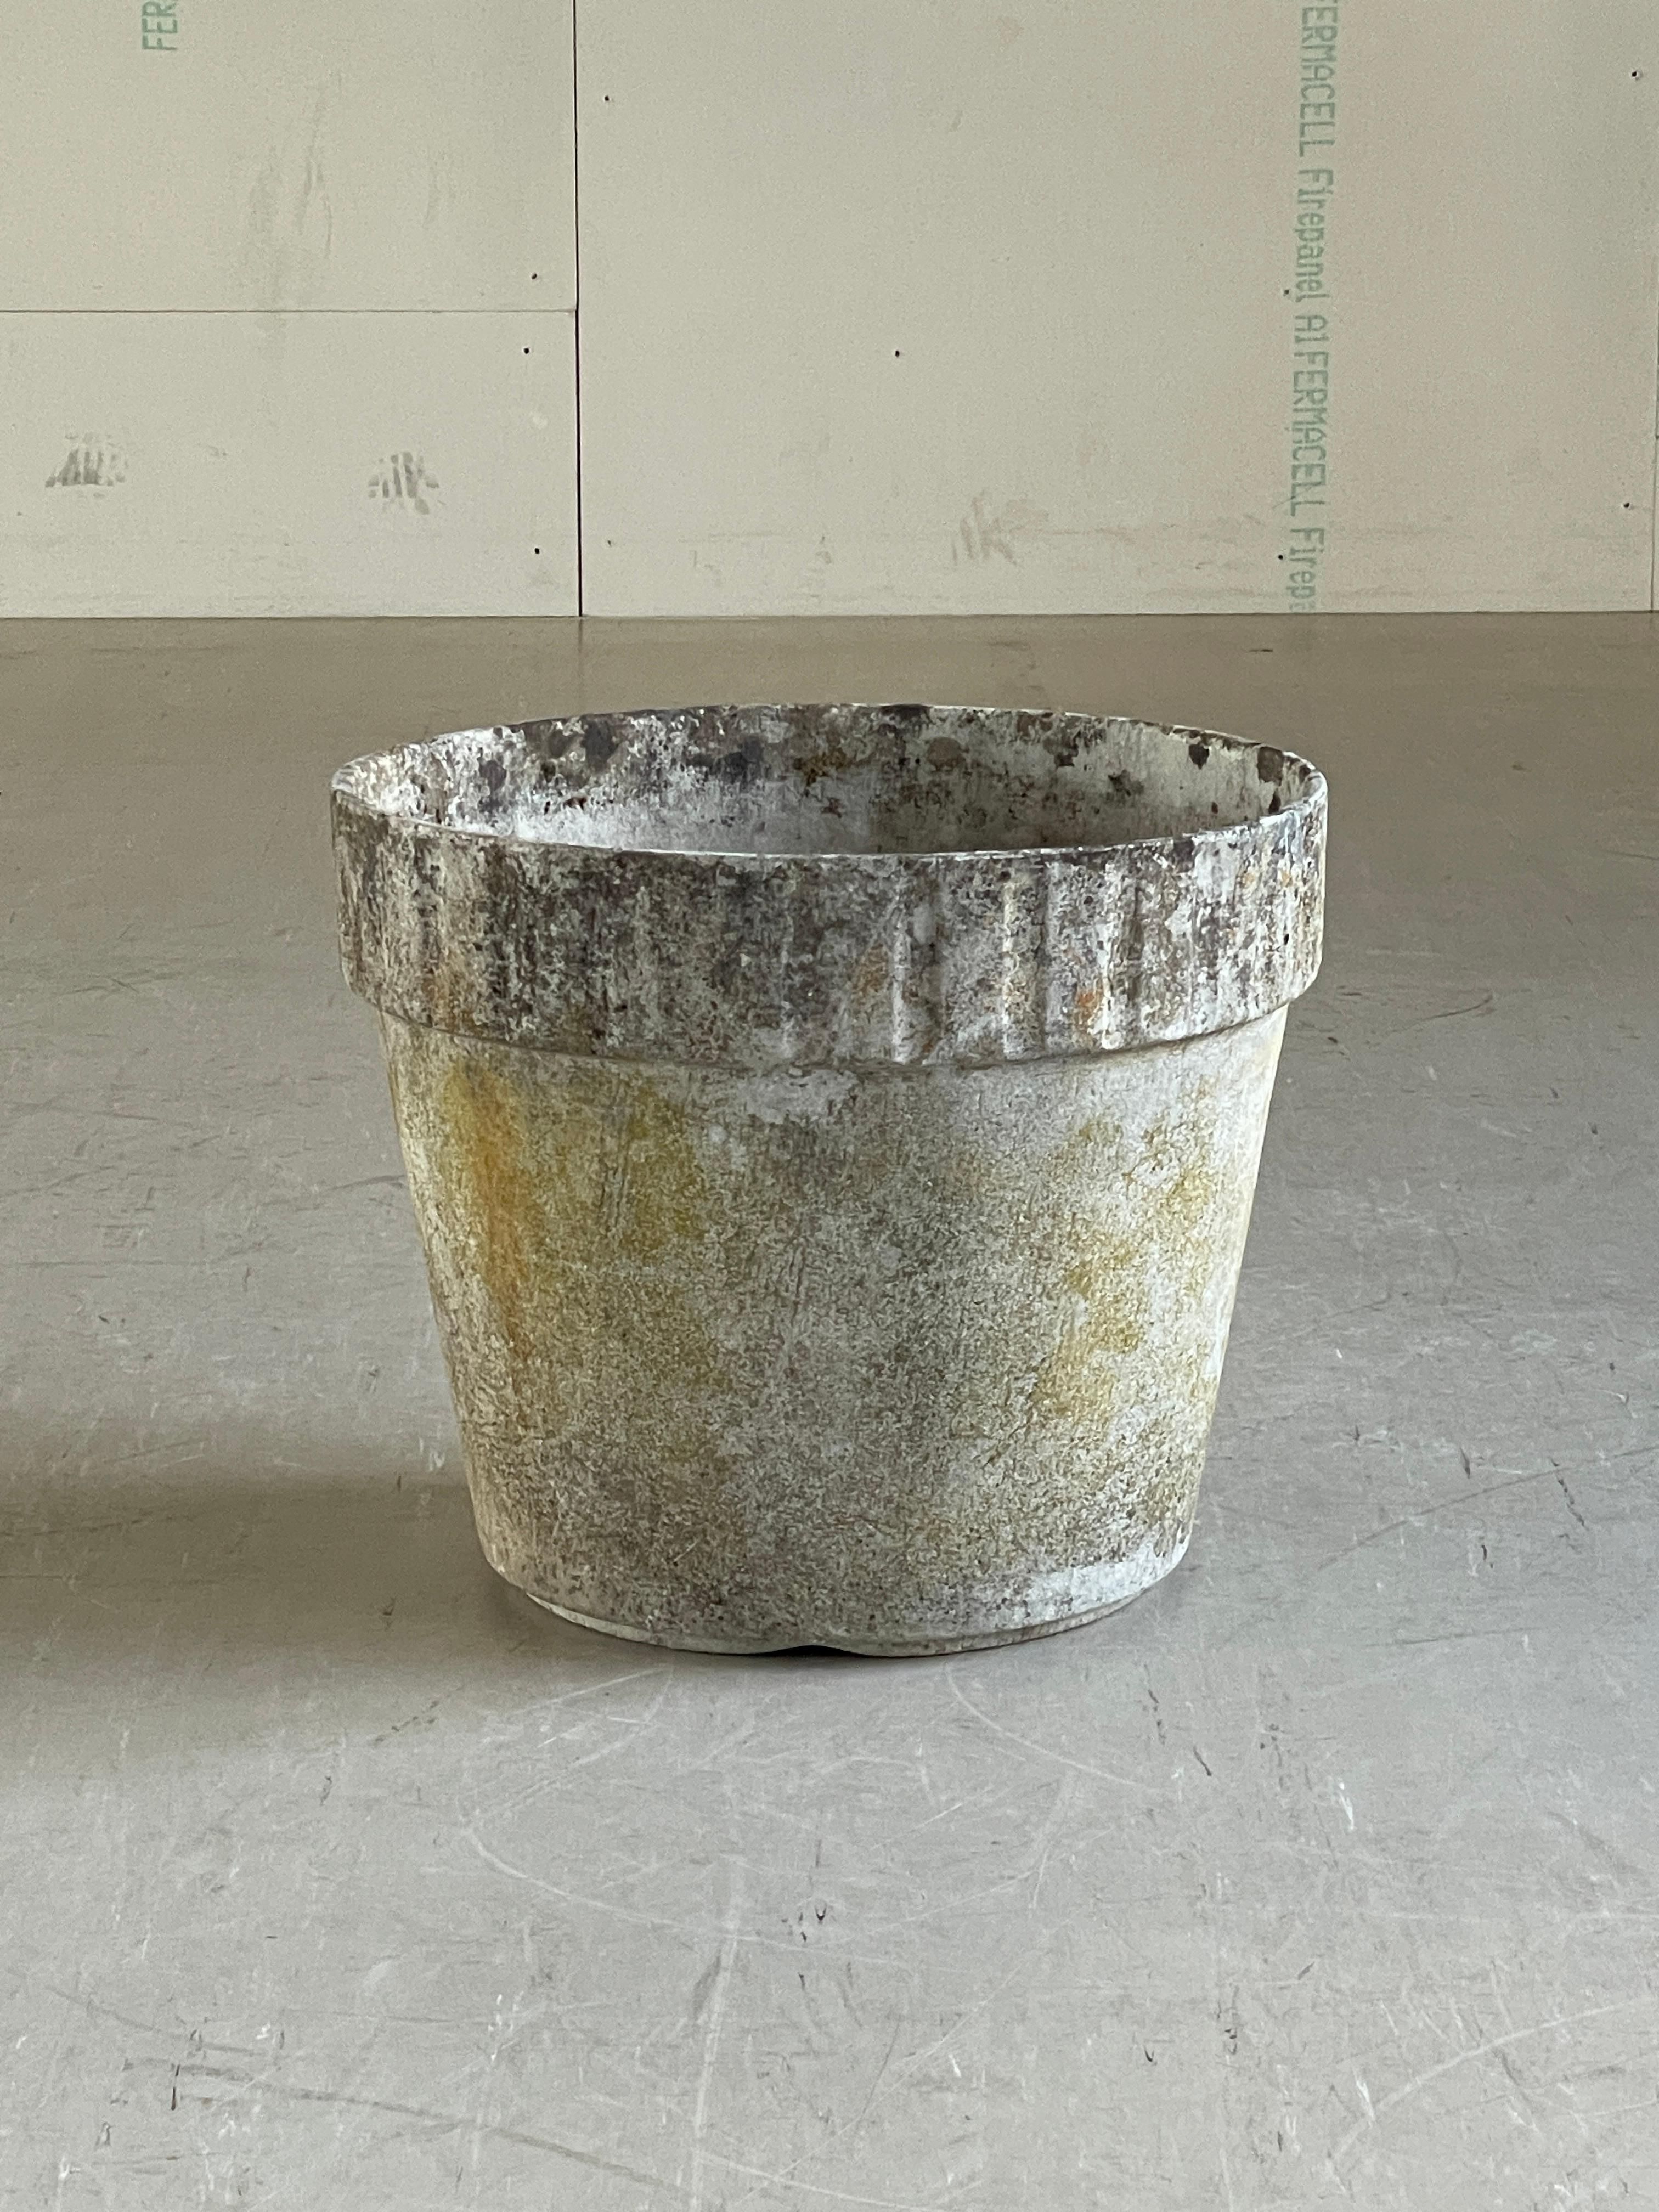 Willy Guhl Concrete Planter - Eternit AG, Switzerland #1 In Good Condition For Sale In Bern, CH